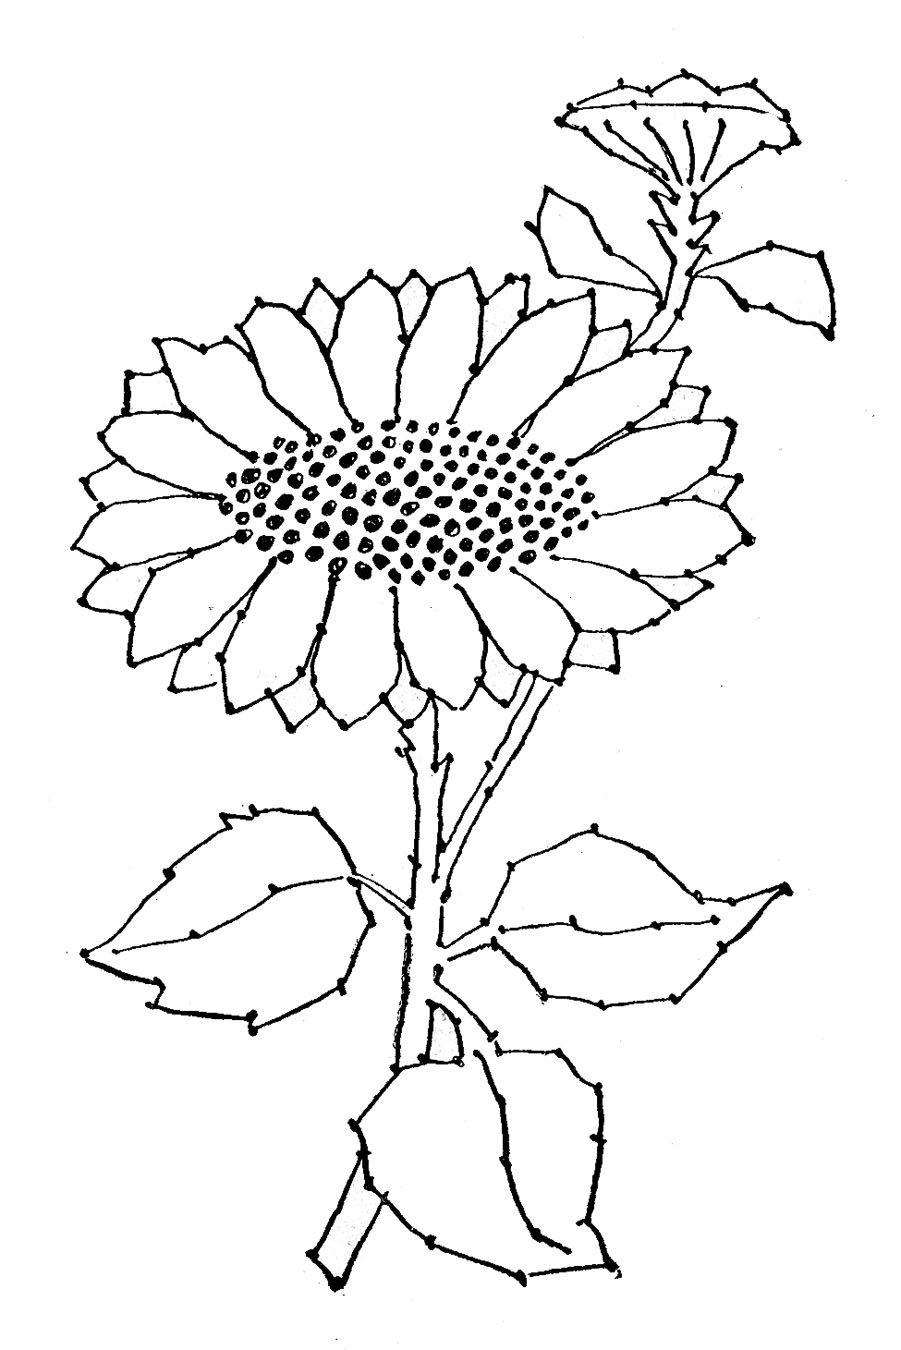 free black and white clip art sunflowers - photo #29